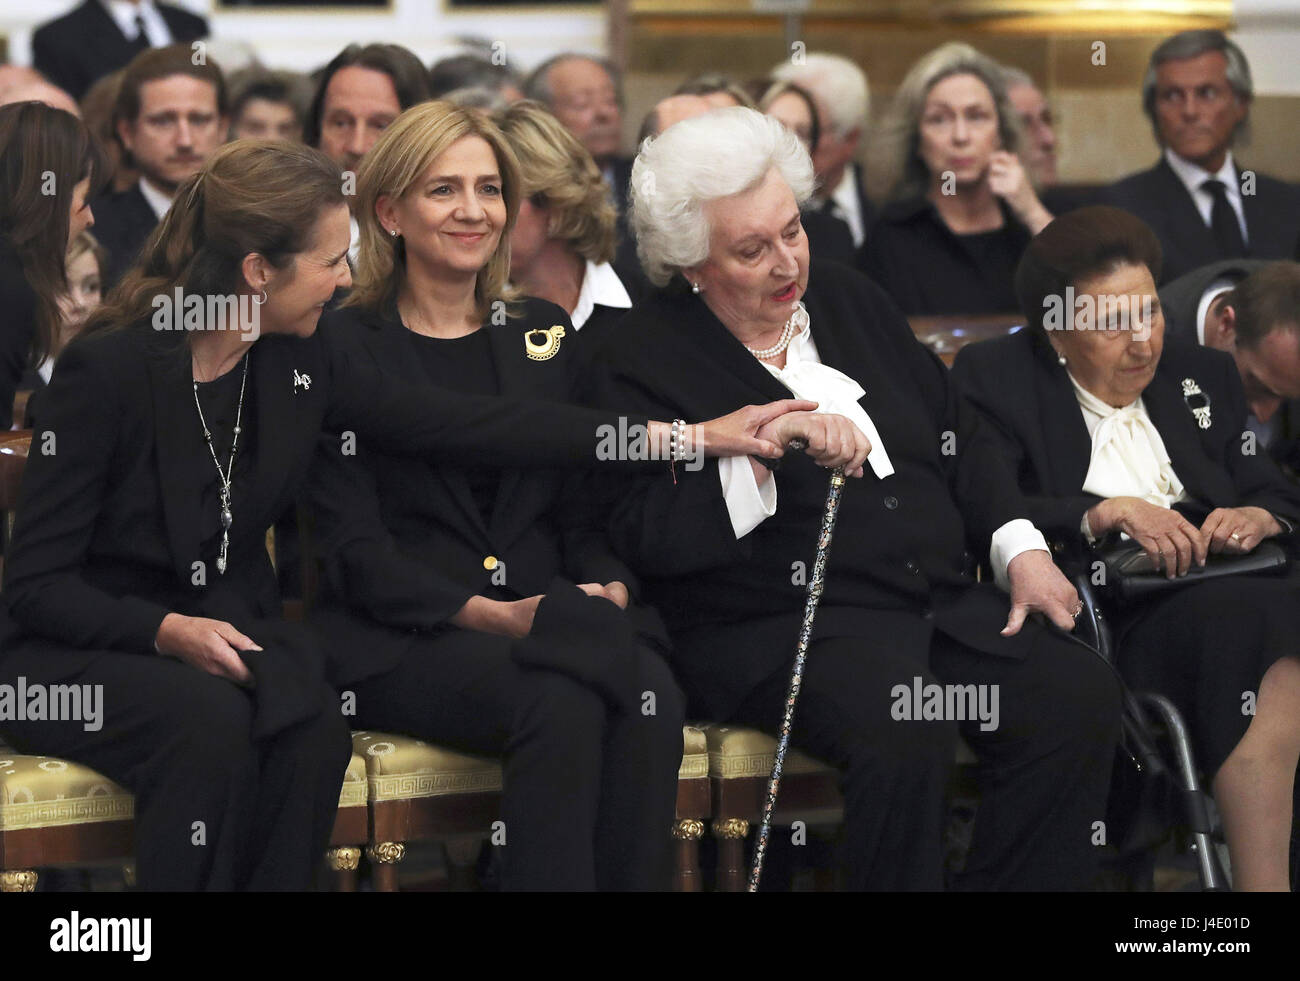 Madrid, Spain. 11th May, 2017. Infants Pilar, Margarita , Cristina and  Elena de Borbon during the funeral by the Infanta Alicia de Borbón-Parma  that has taken place today in the chapel of